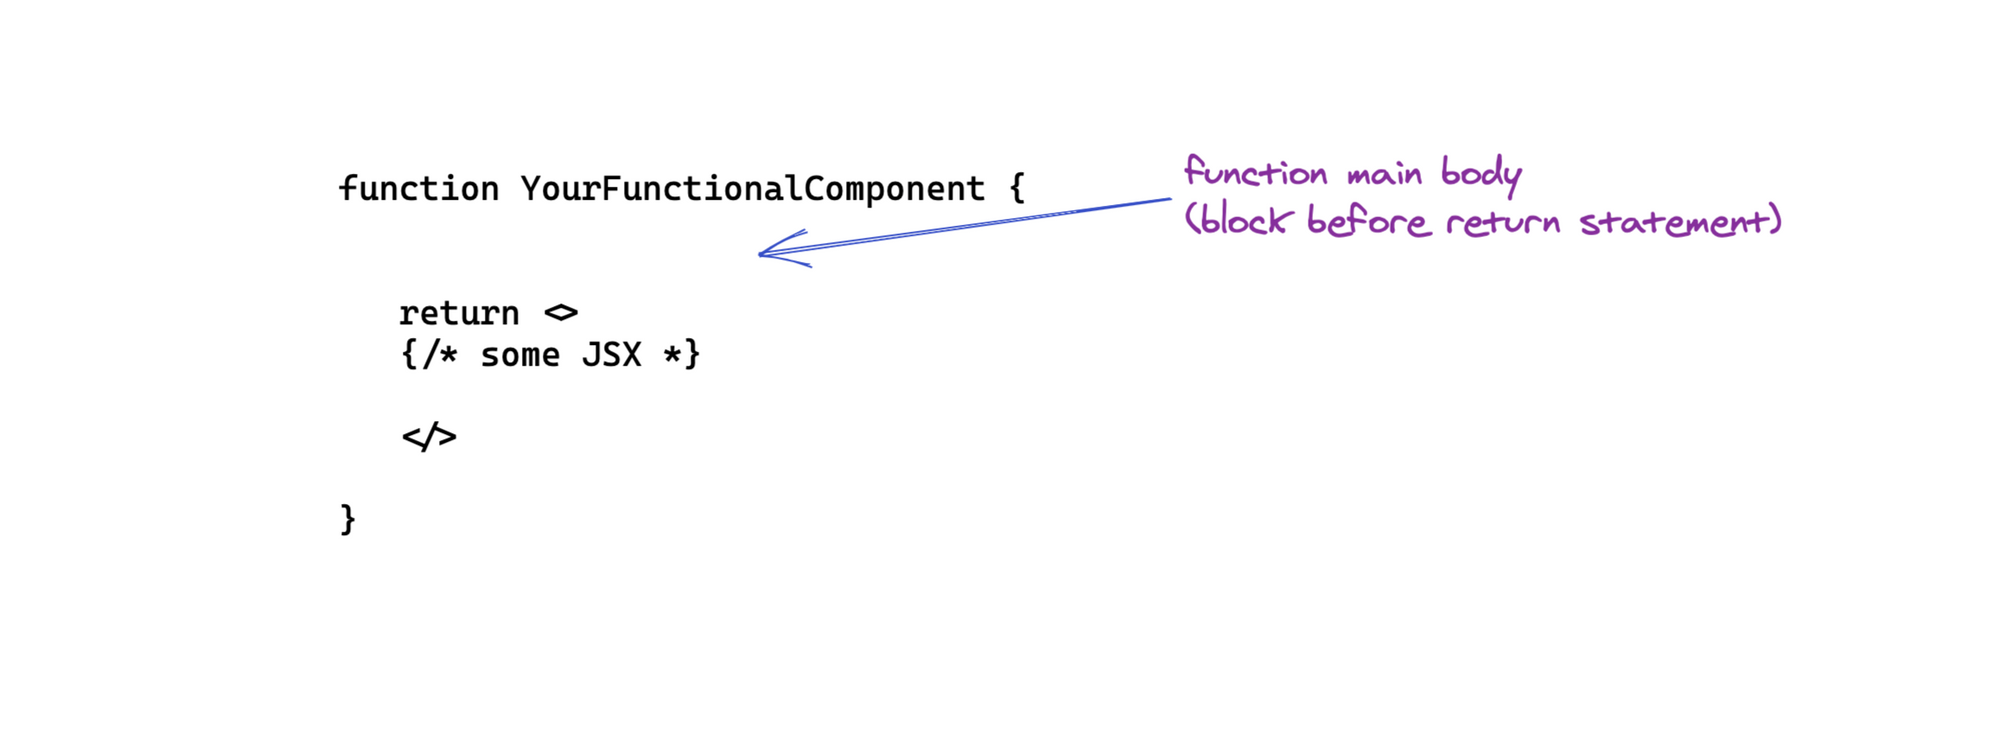 Function main body refers to the block before the function return statement. 